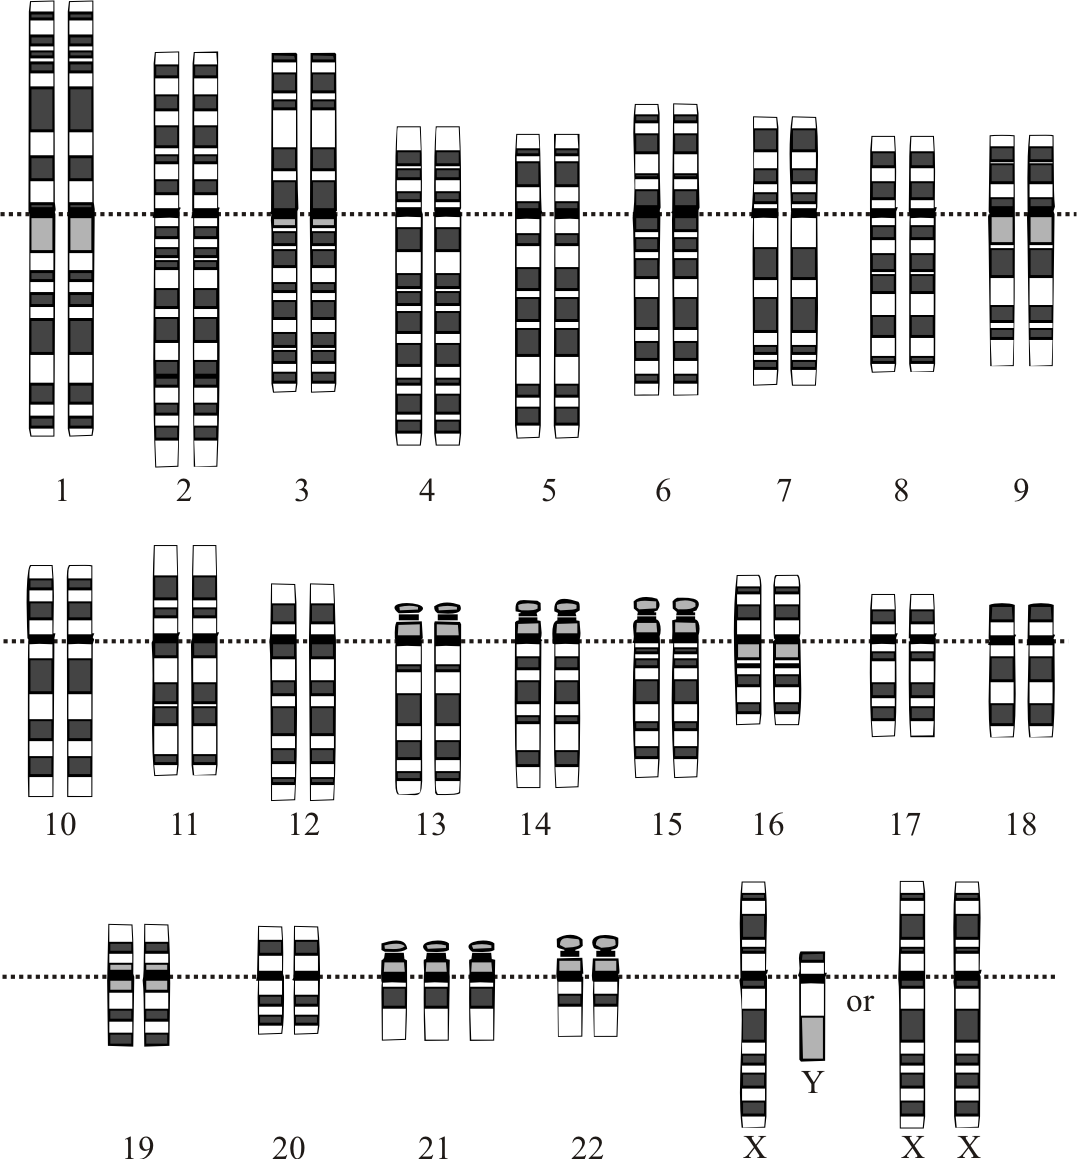 Karyotype of a person with Down Syndrome. Note the 3 chromosomes in the 21st position.